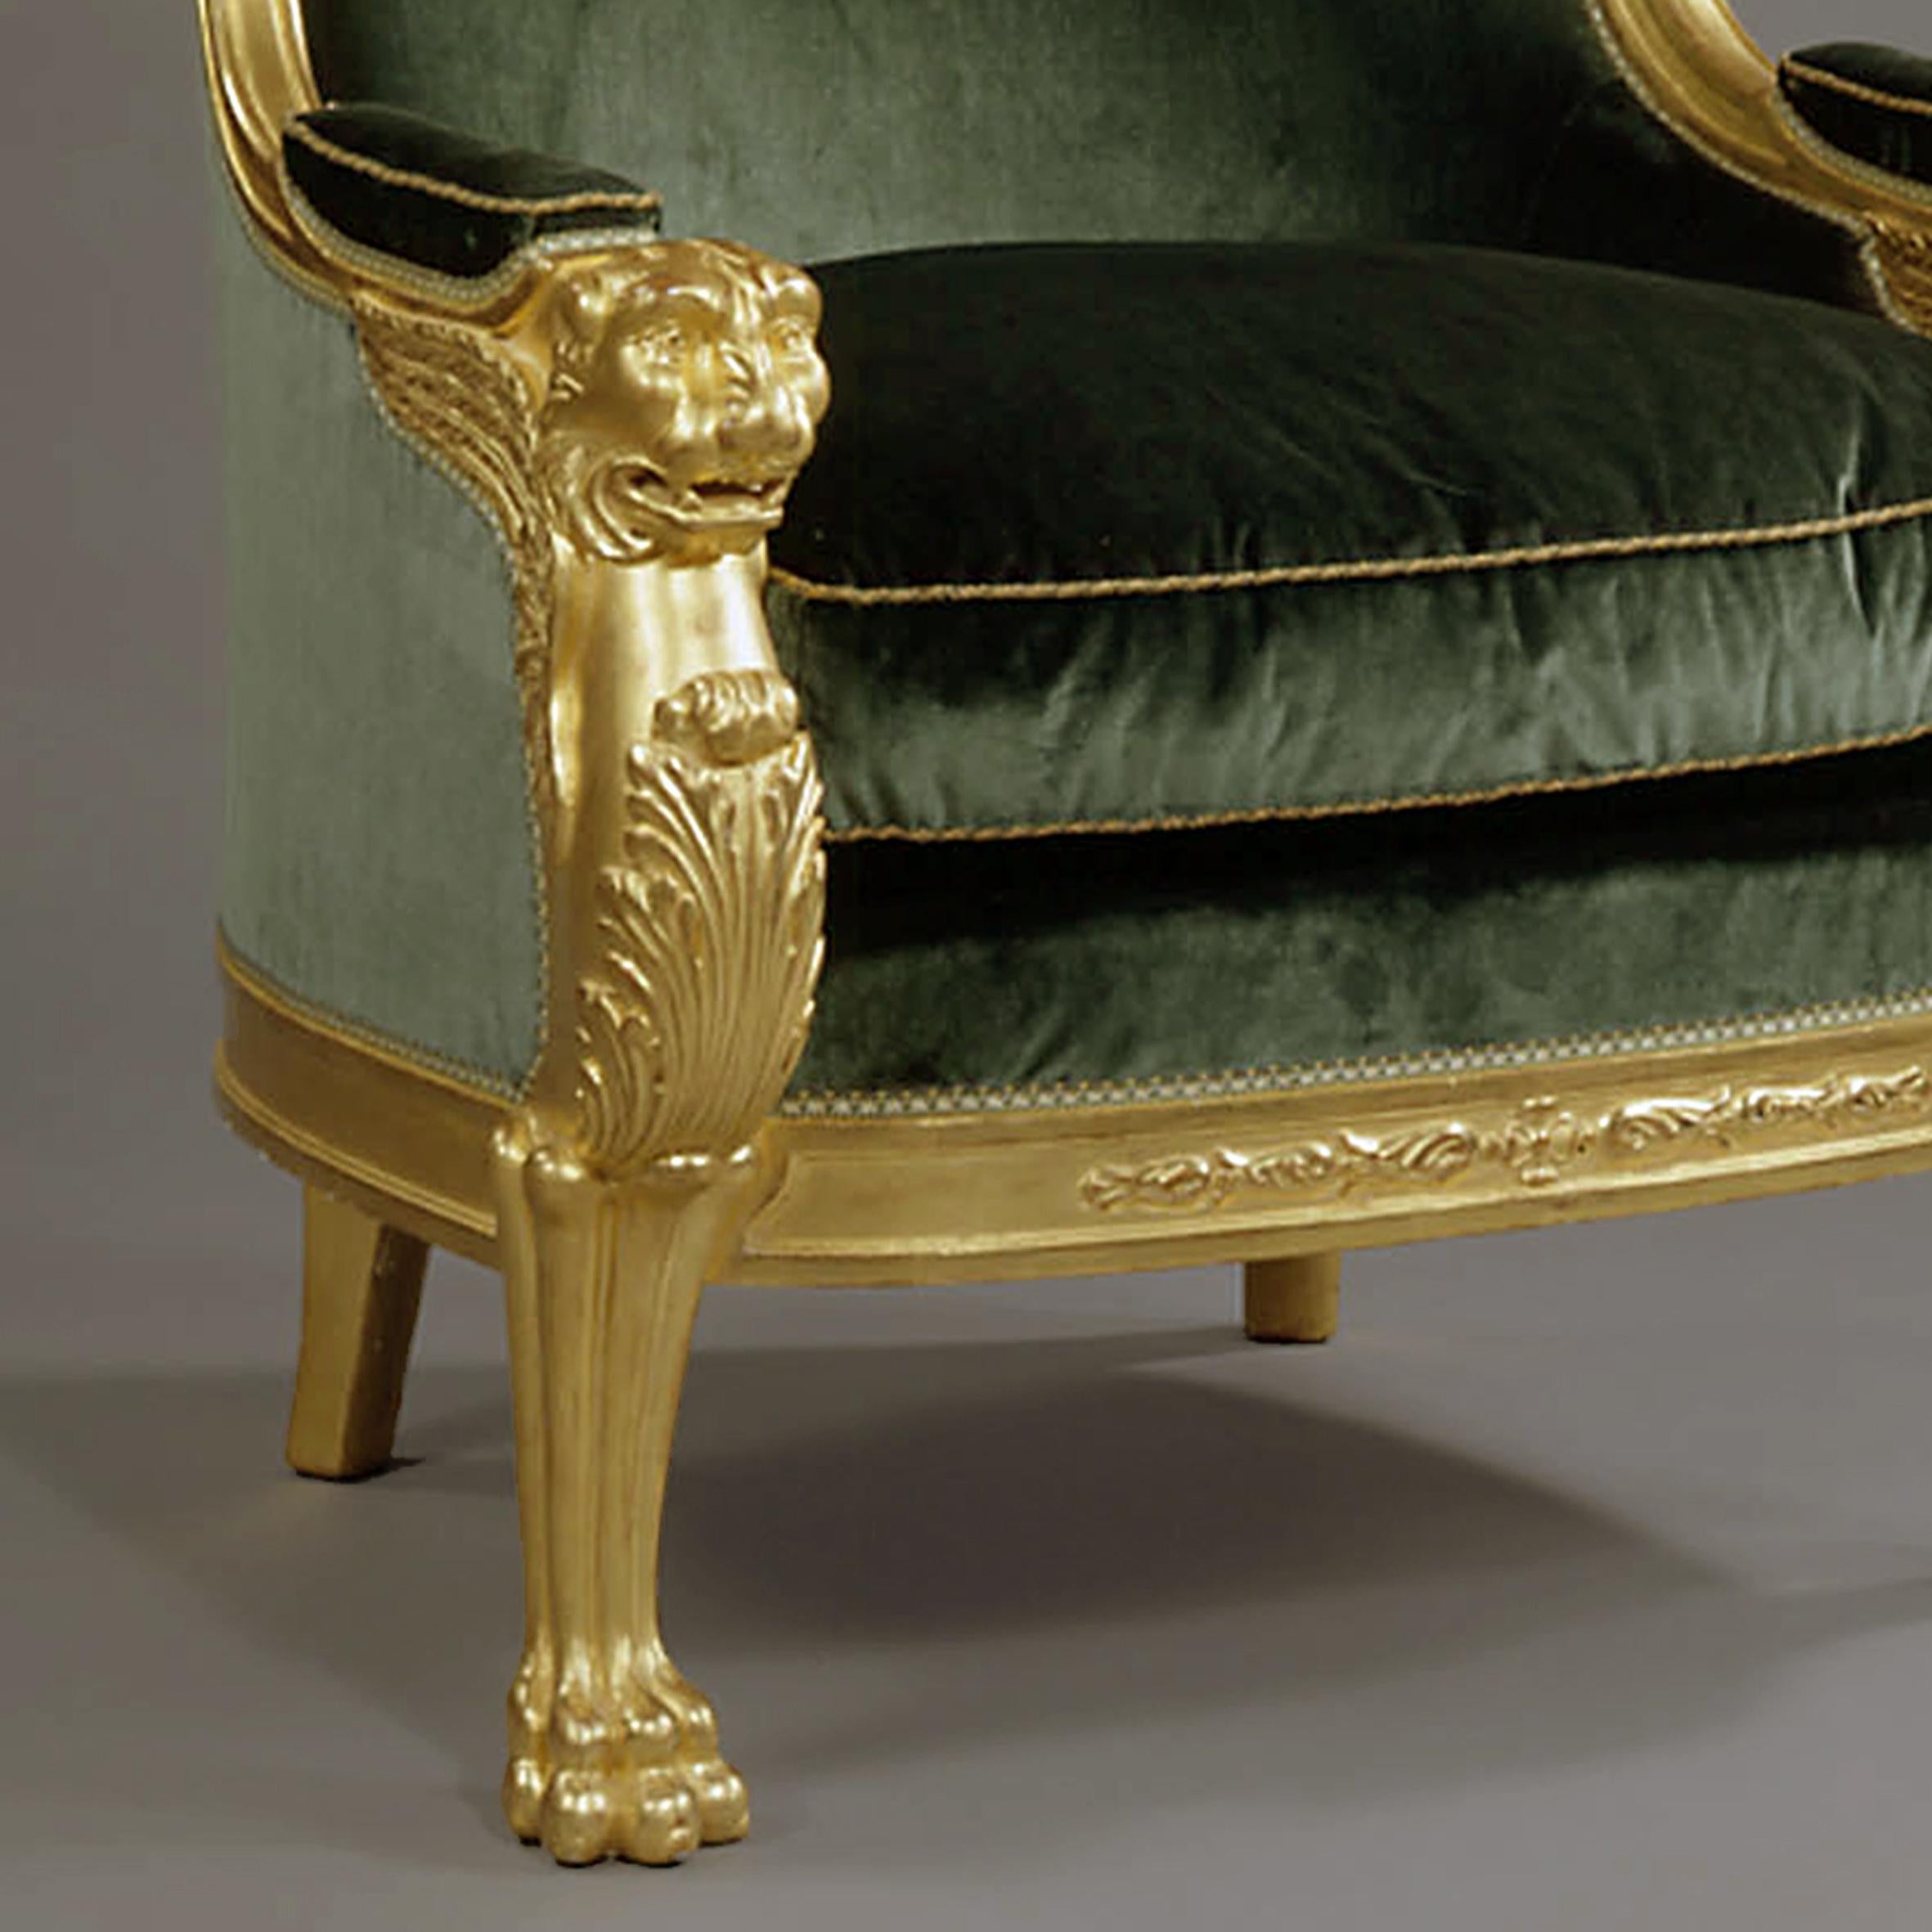 An Important Pair of Empire Style Carved Giltwood Tub Chairs with Green Velvet Upholstery.  The Lion Monopedia side supports feature finely carved detail and a realistic pose.

These extremely large chairs are unusual because of both their size and